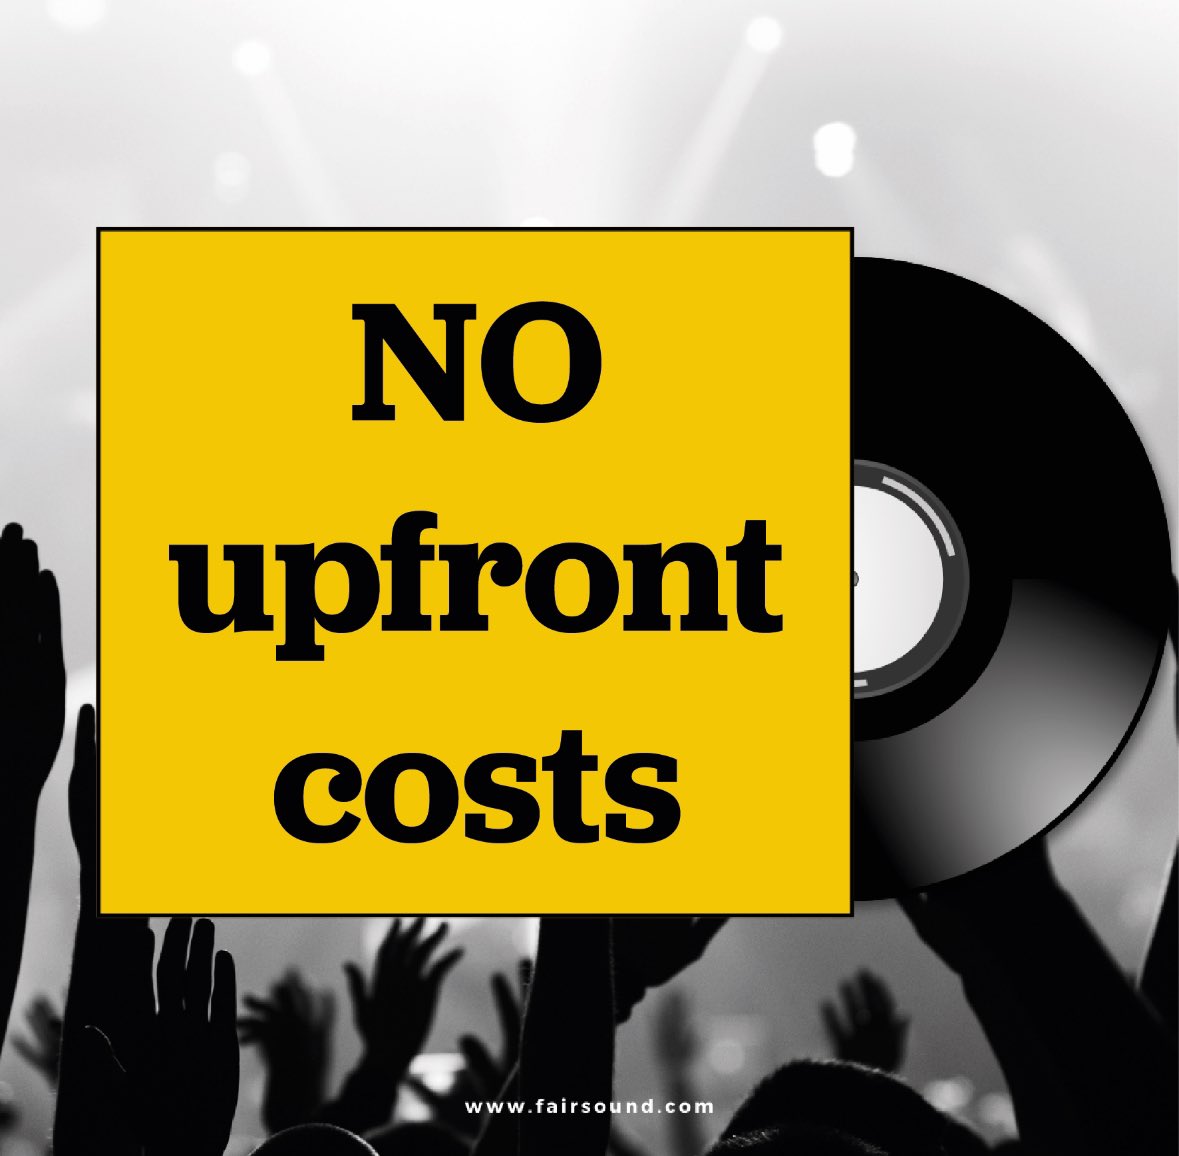 Setting up your campaign on FairSound.com is completely free, so once you feel ready to sell vinyl there’s nothing stopping you setting up a campaign! 🎶 All your costs are covered upfront by your sales once you hit the minimum number of sales to press 100 records!